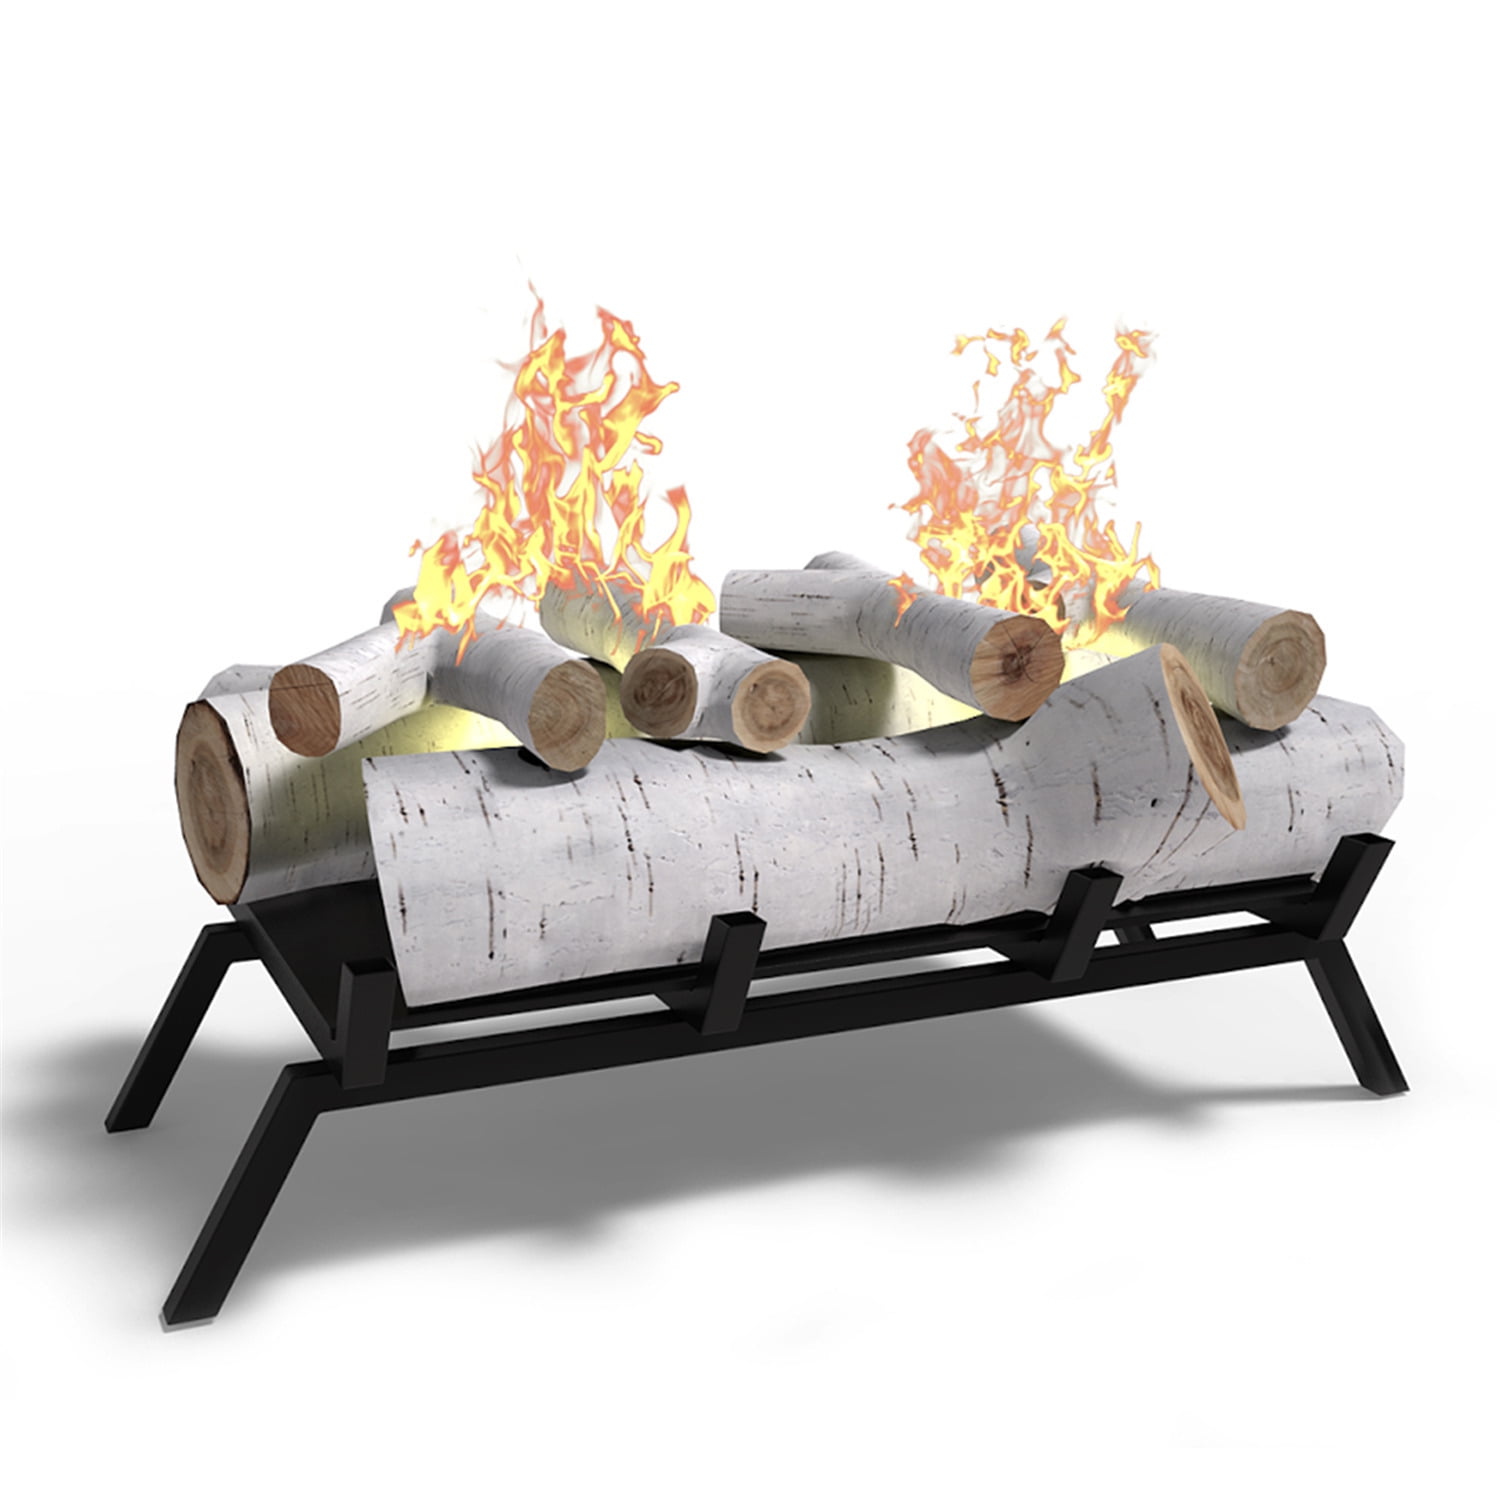 Regal Flame 18" Ethanol Fireplace Grate Log Set with Burner Insert for Easy Conversion from Gas Logs, Gel, Wood Log, Electric Lo